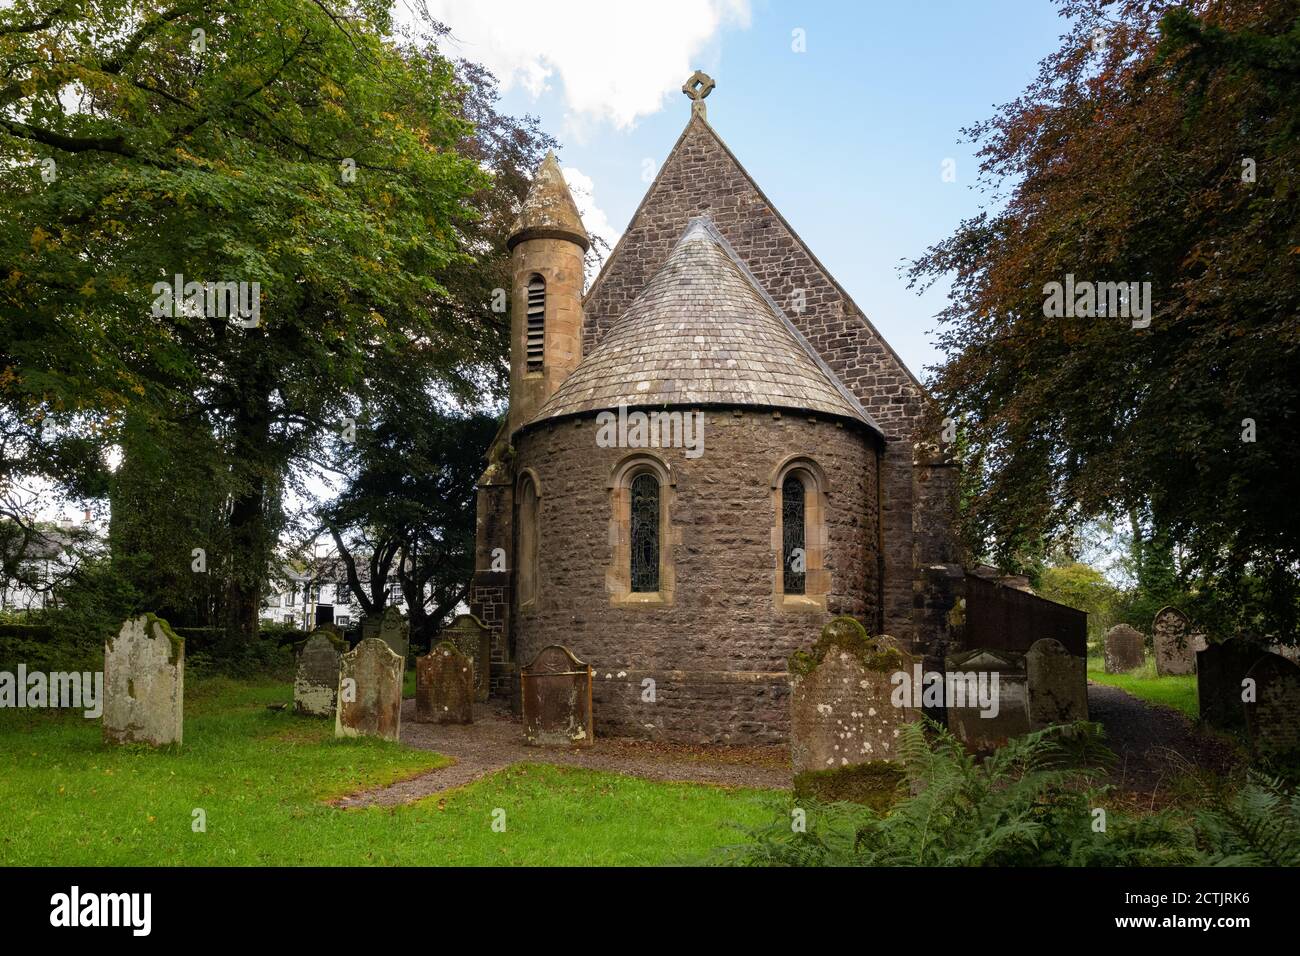 St Marys Church a Romanesque style church in the small village of Ennerdale Bridge in the Lake District, Cumbria, England, UK Stock Photo